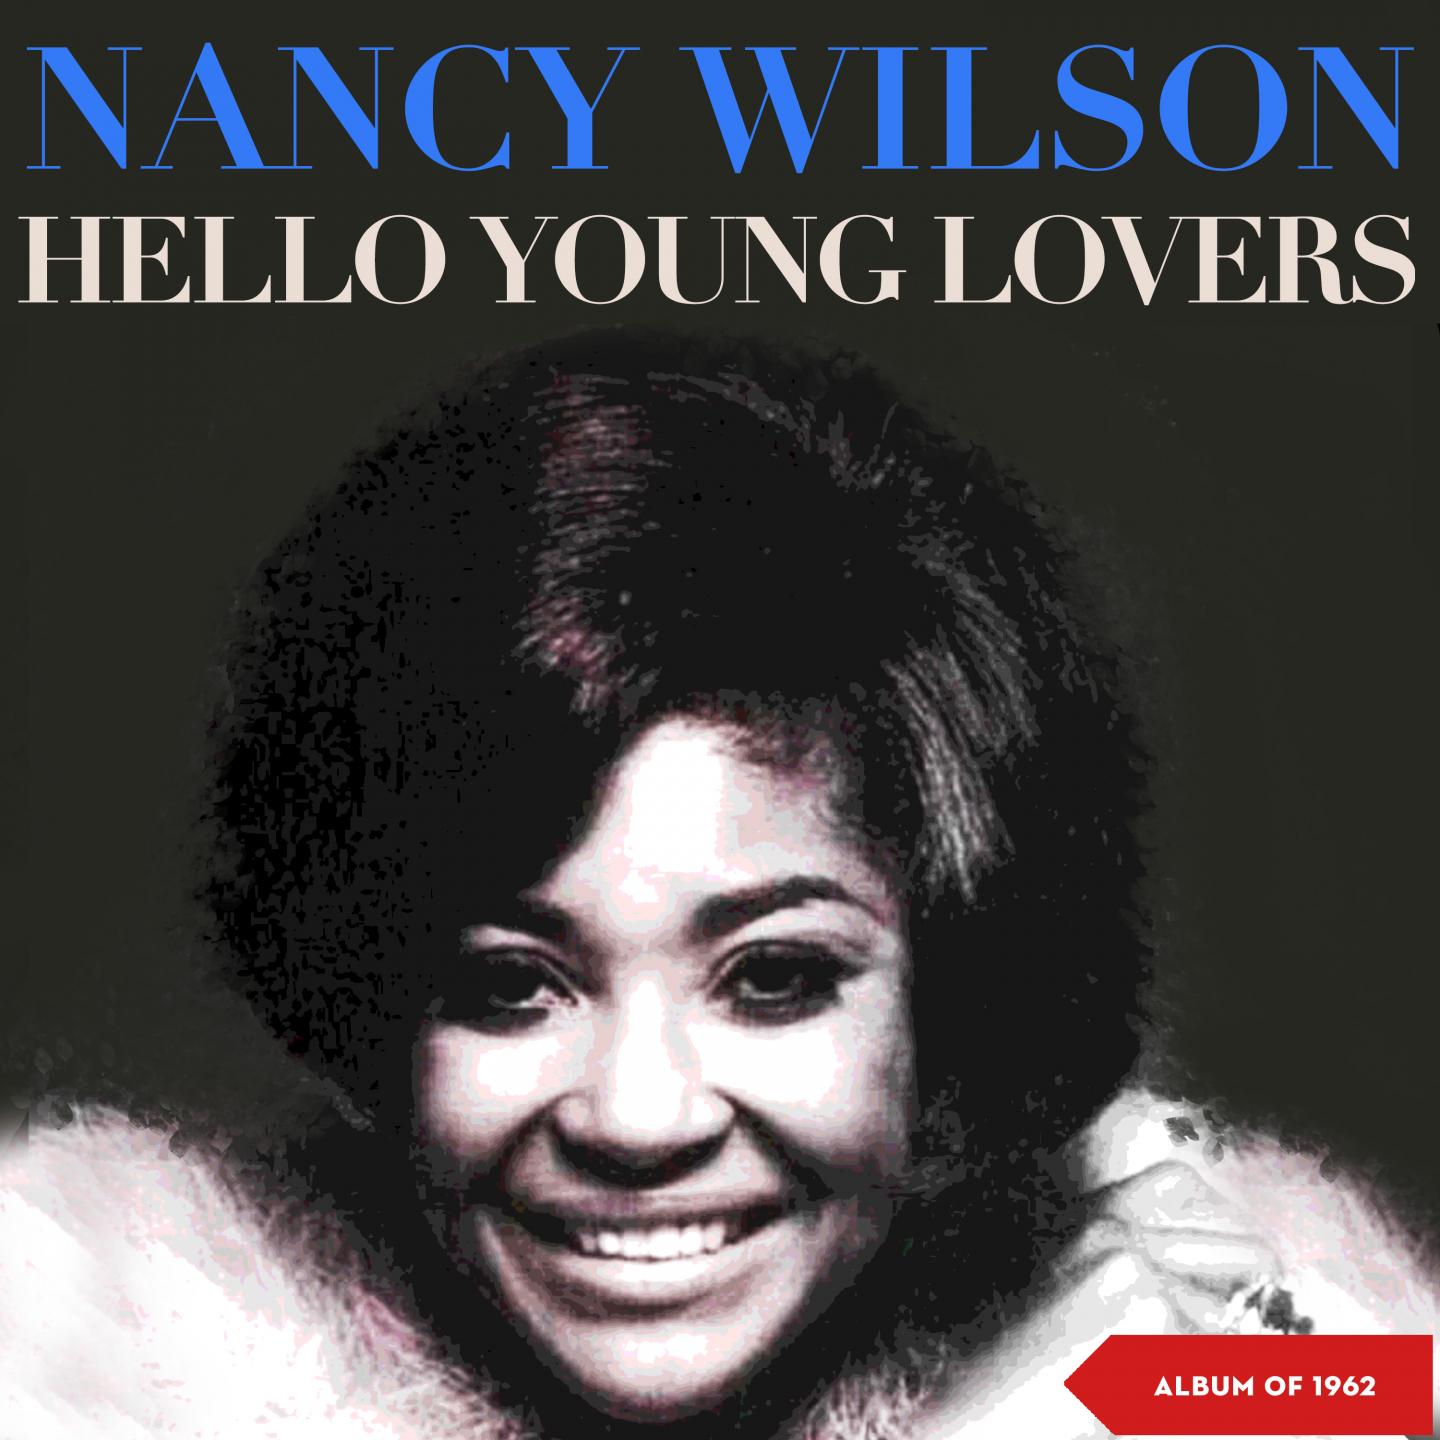 Hello Young Lovers (Album of 1962)